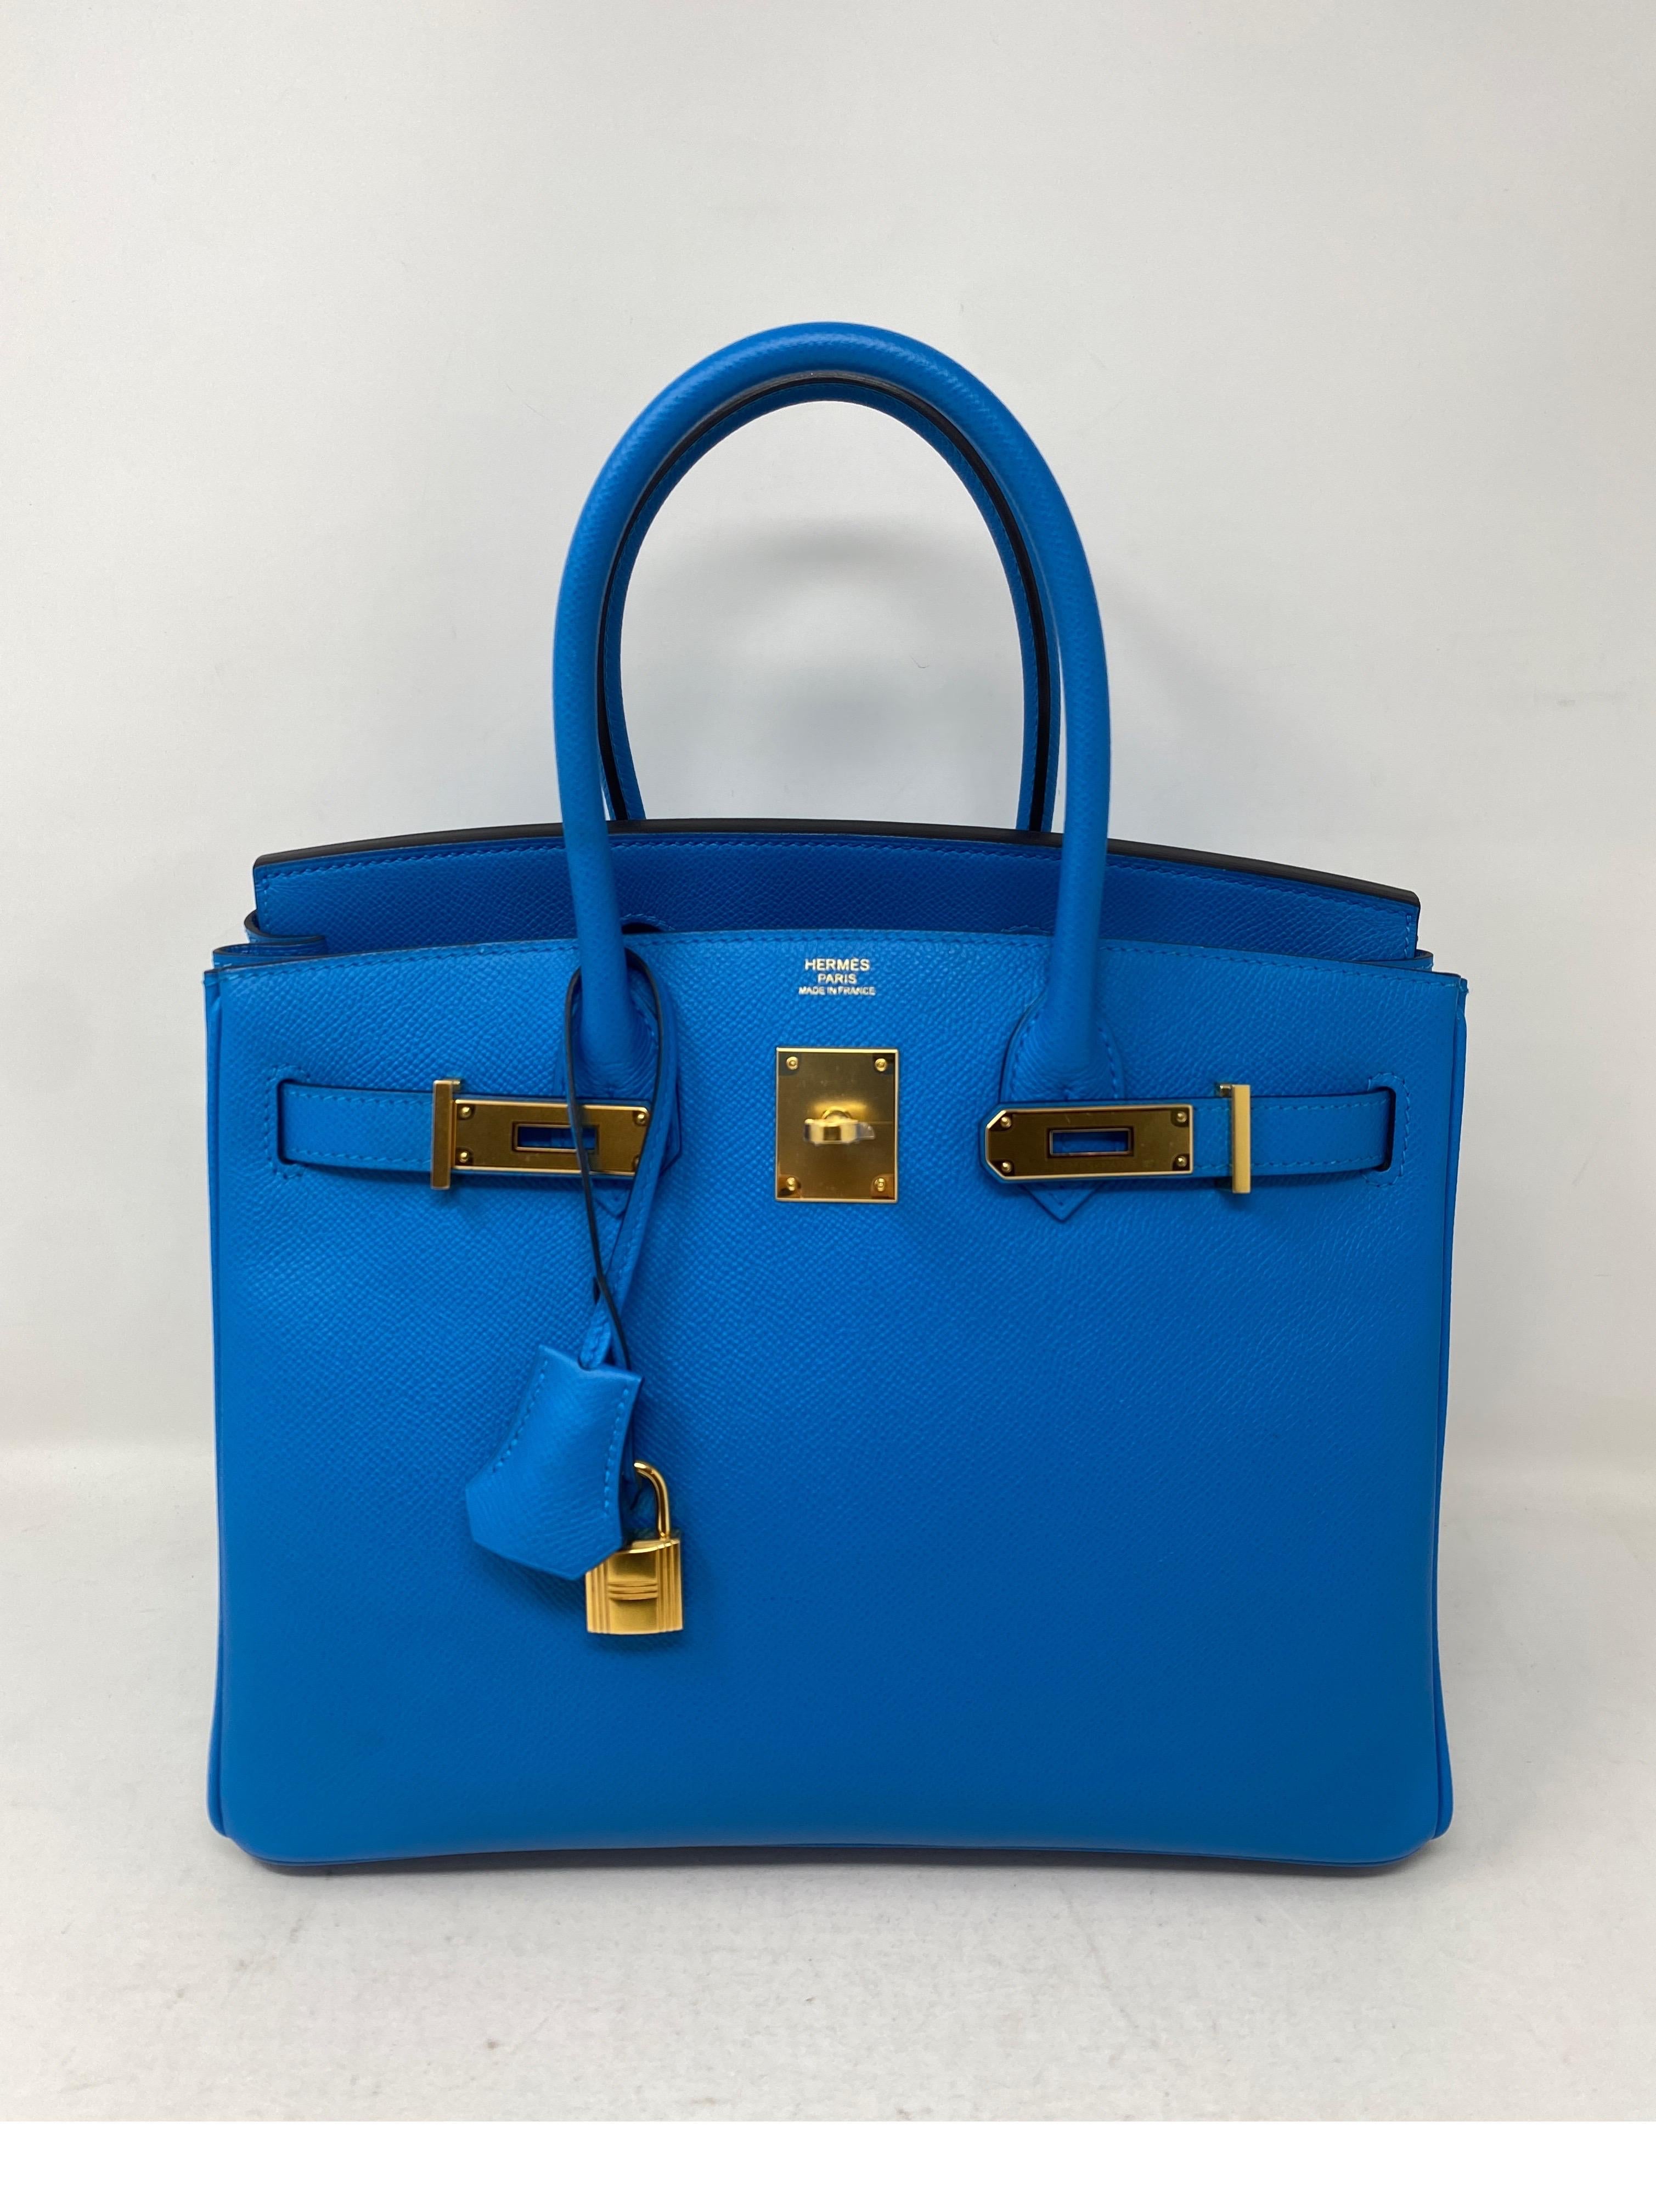 Hermes Blue Zanzibar Birkin 30 Bag. Vibrant rare blue color with gold hardware. Like new bag. Newer bag. Still has plastic on hardware. Don't miss out on this amazing color combo. Includes clochette, lock, keys, and dust cover. Guaranteed authentic. 